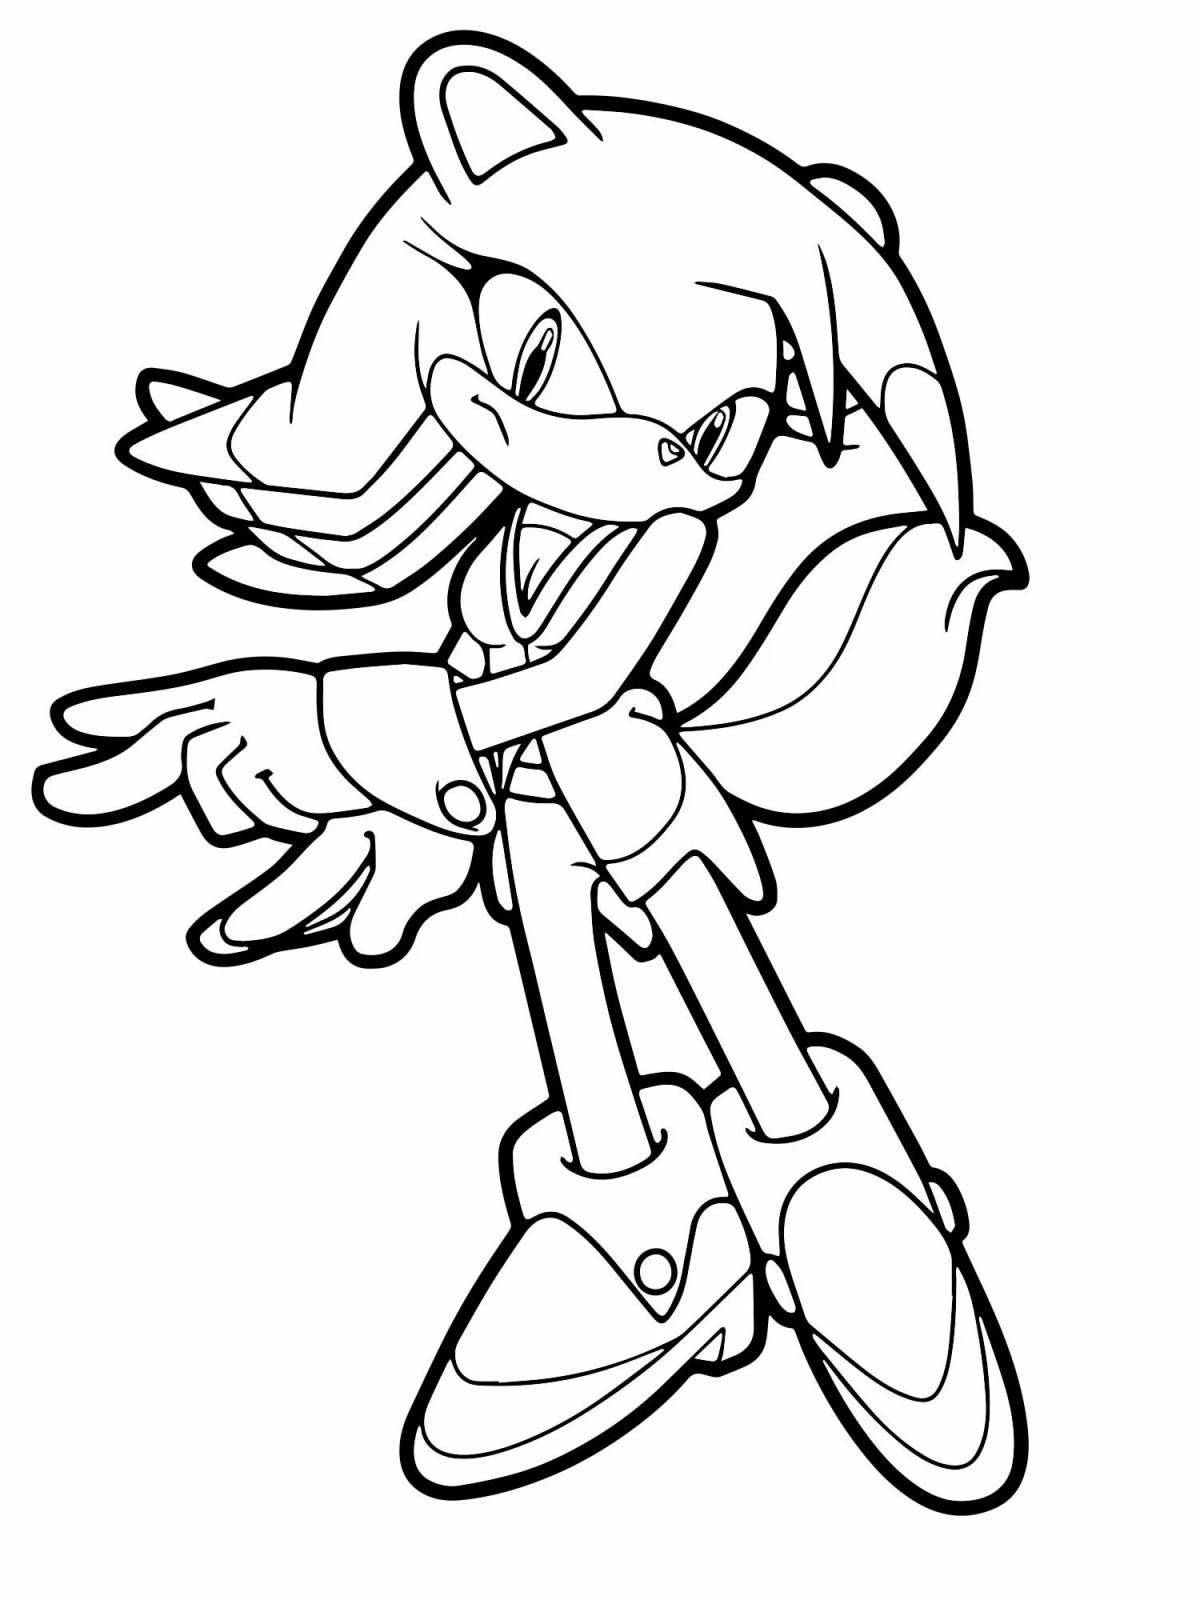 Witty xs sonic coloring page